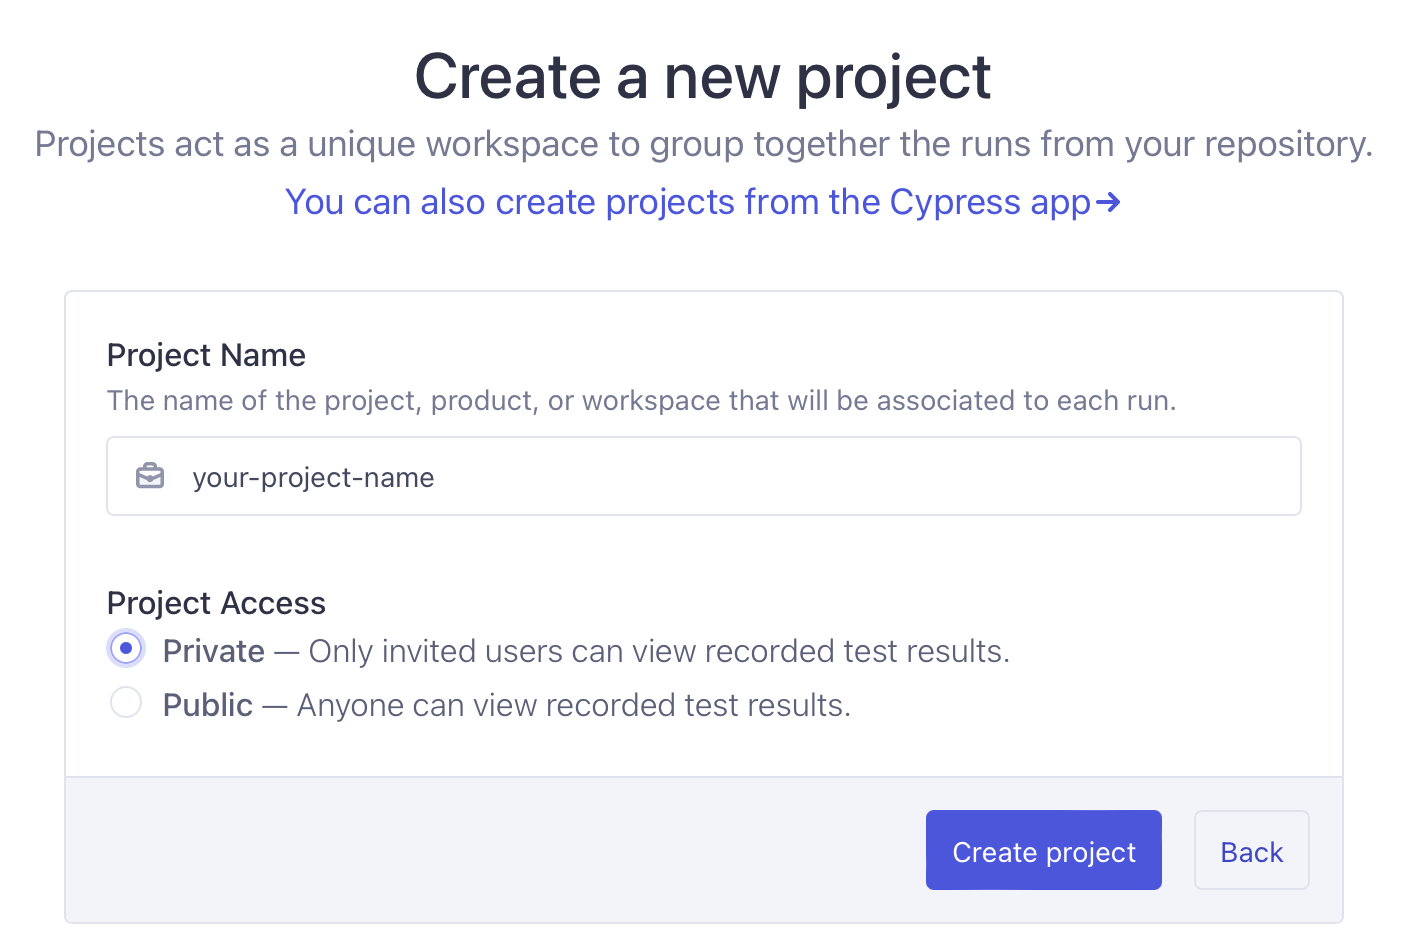 Creating project on Cypress